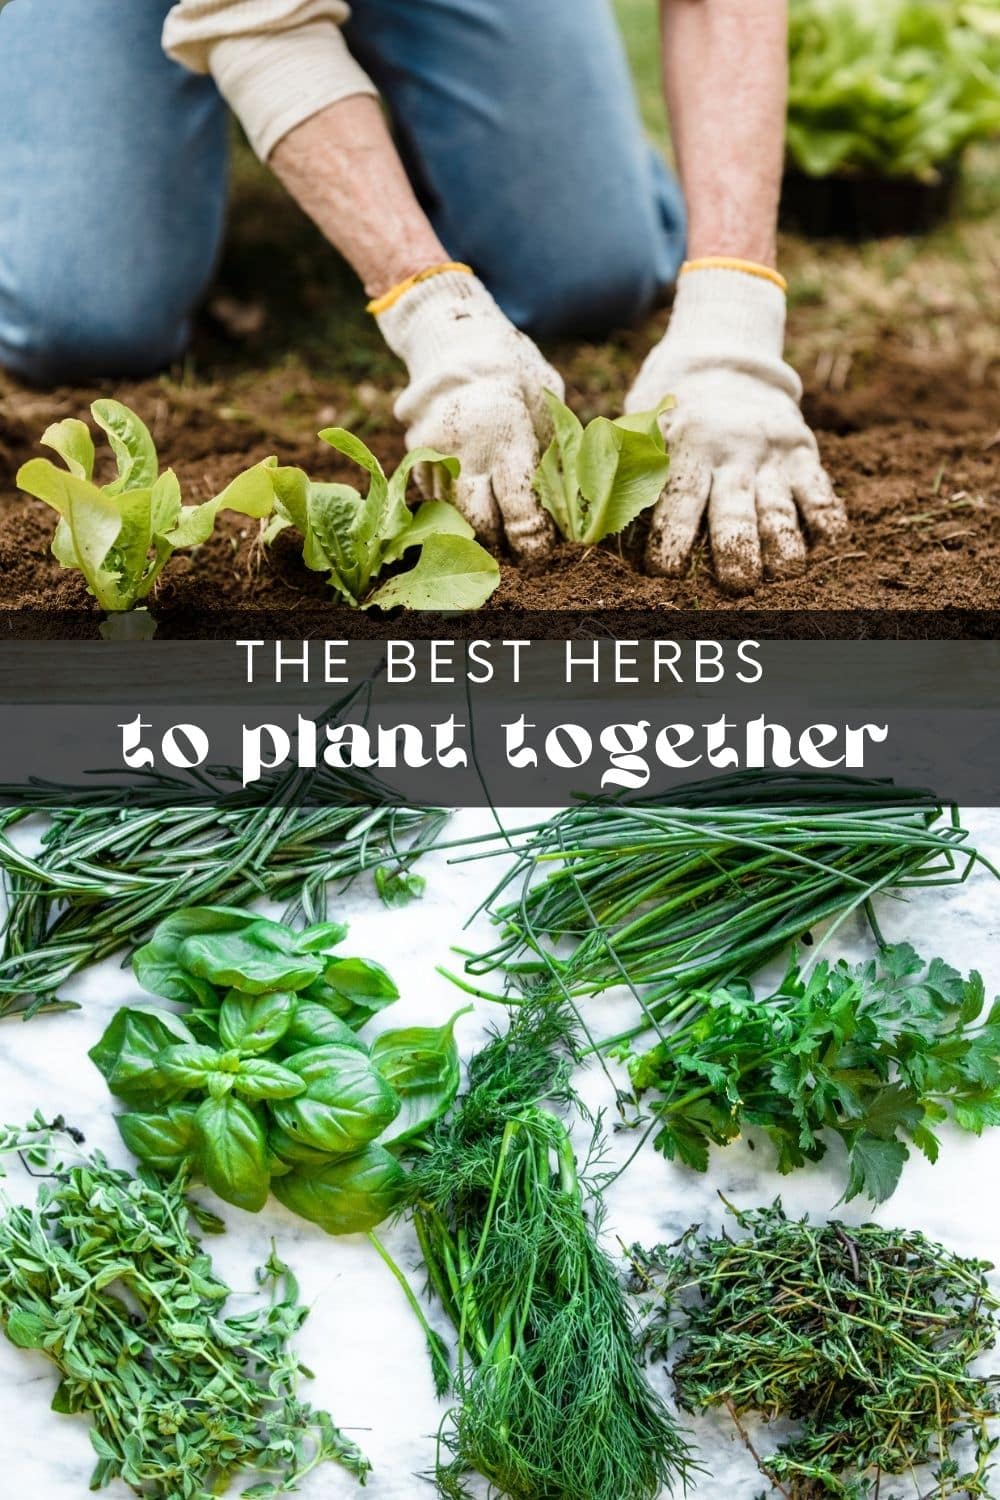 Fresh herbs are an easy way to add flavor and nutrition to any dish! Even if you don't have much space to work with, there's no reason you can't grow herbs. So whether you have a balcony, windowsill, or just a bit of yard space – you can still enjoy the benefits of your own herb garden.